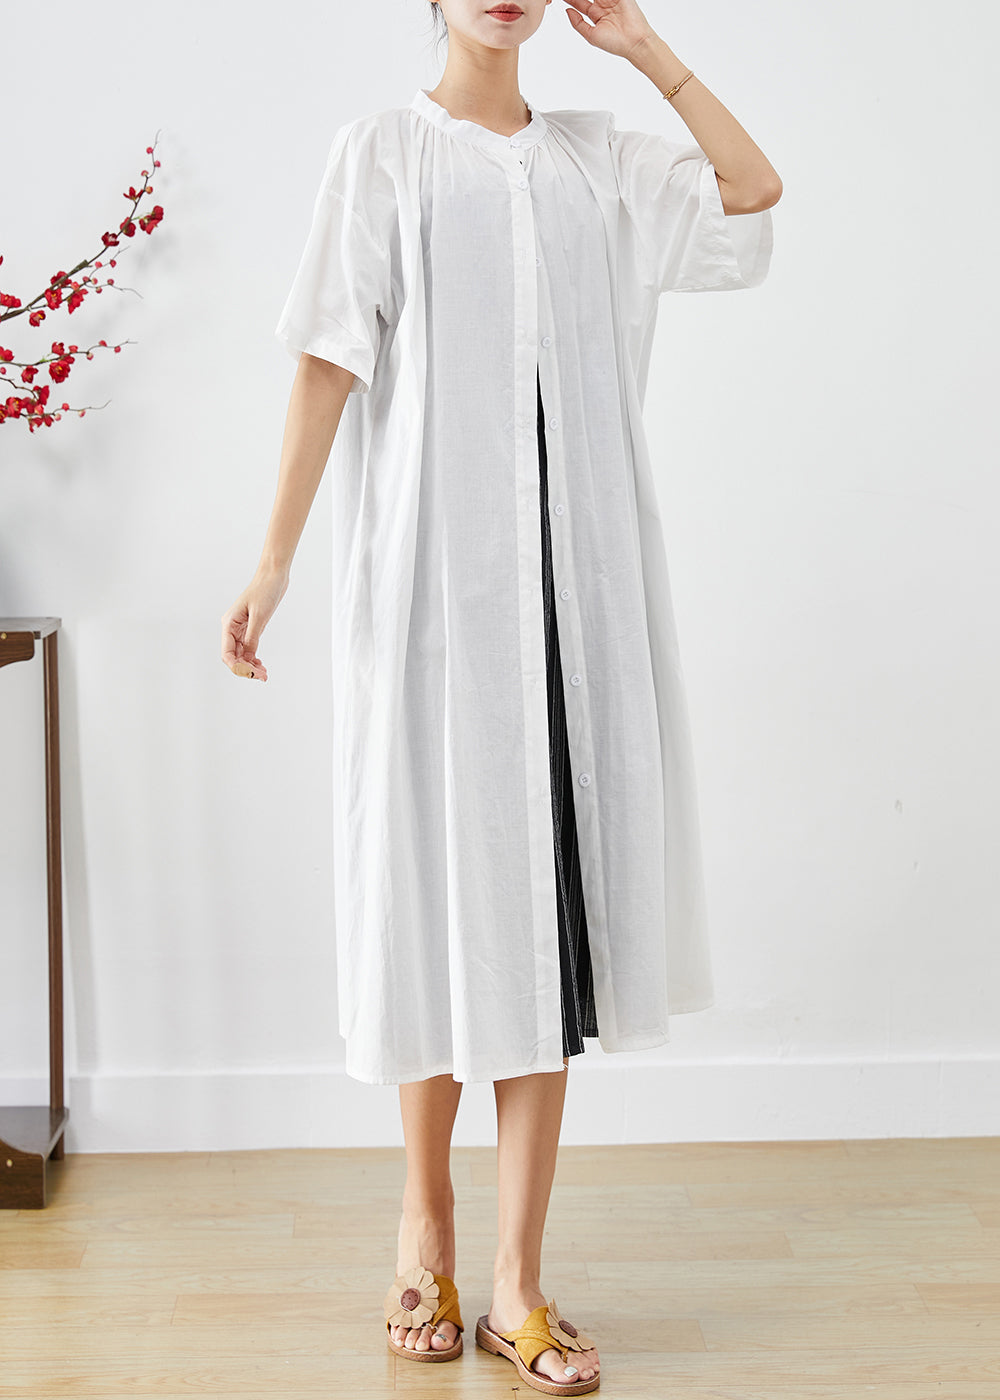 Vintage White Oversized Cotton Cardigan And Dress Two Piece Set Summer